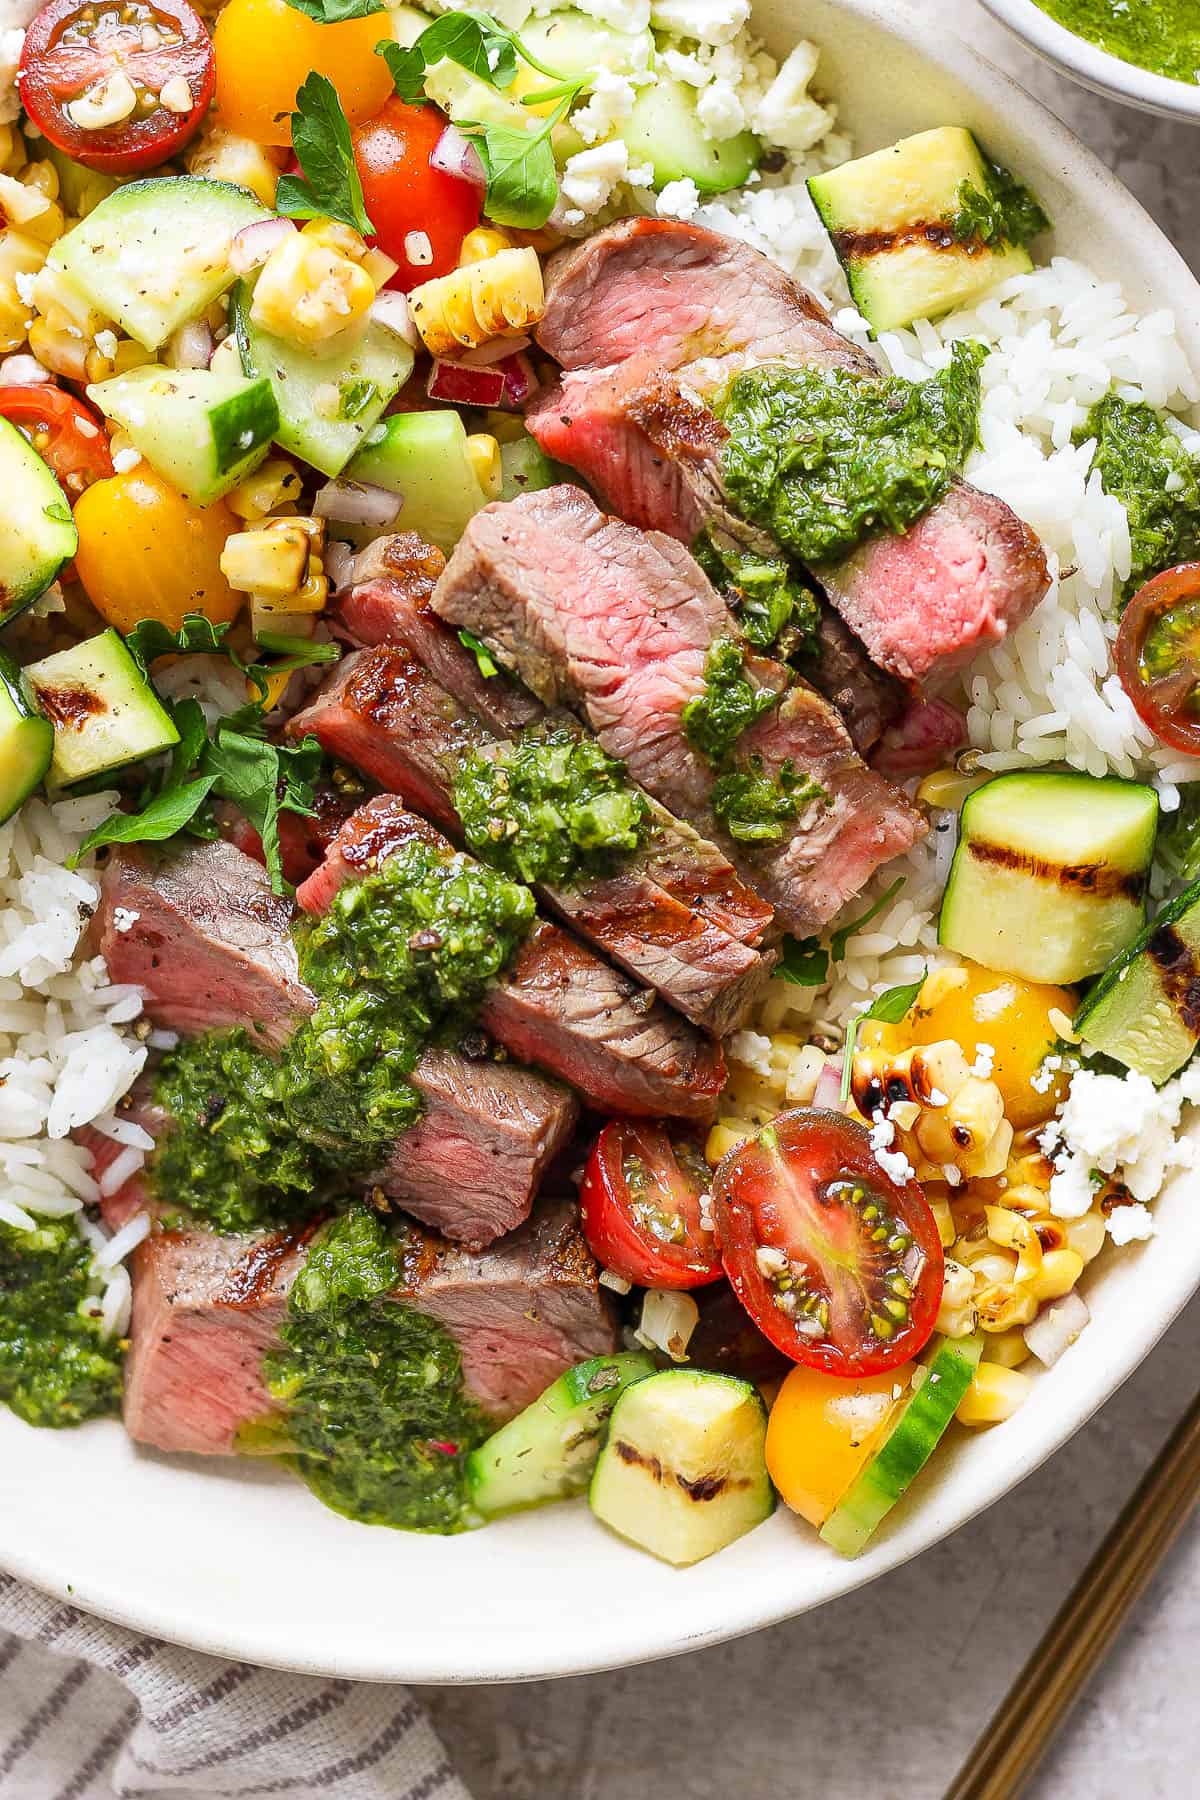 The corn salad added to a steak rice bowl.